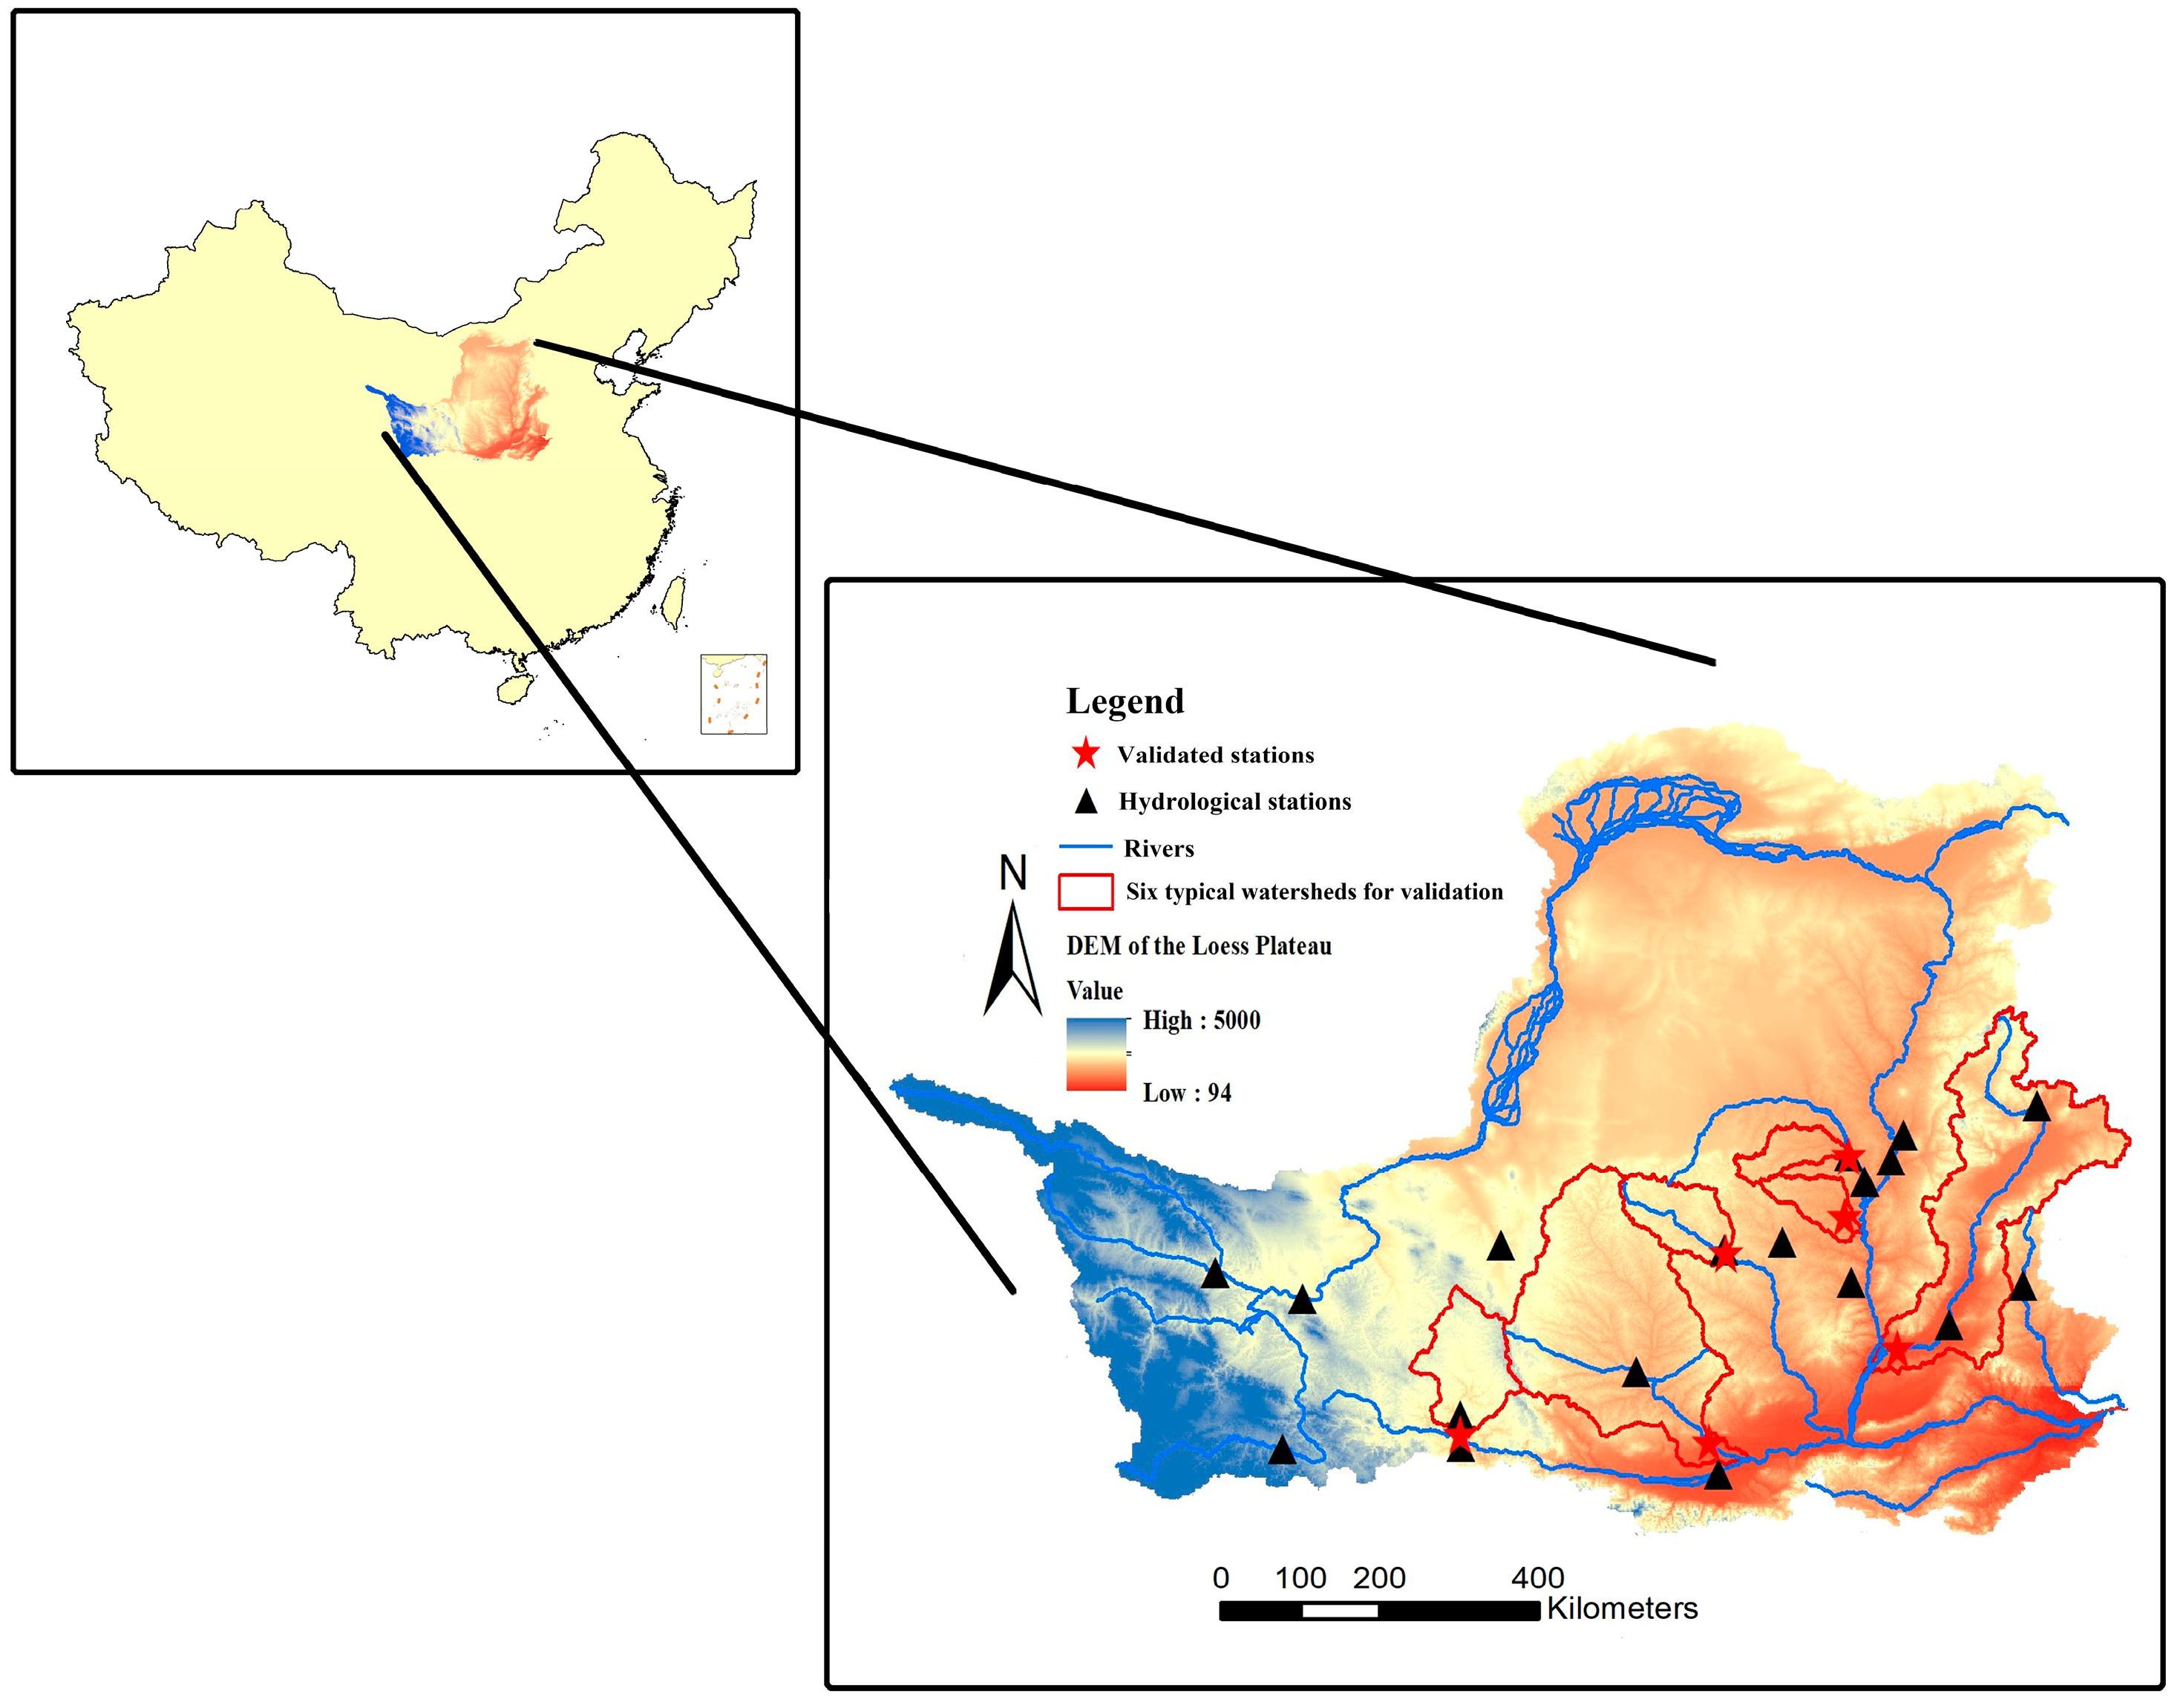 Remote Sensing | Free Full-Text | Estimation of Actual Evapotranspiration  in a Semiarid Region Based on GRACE Gravity Satellite Data—A Case Study in  Loess Plateau | HTML